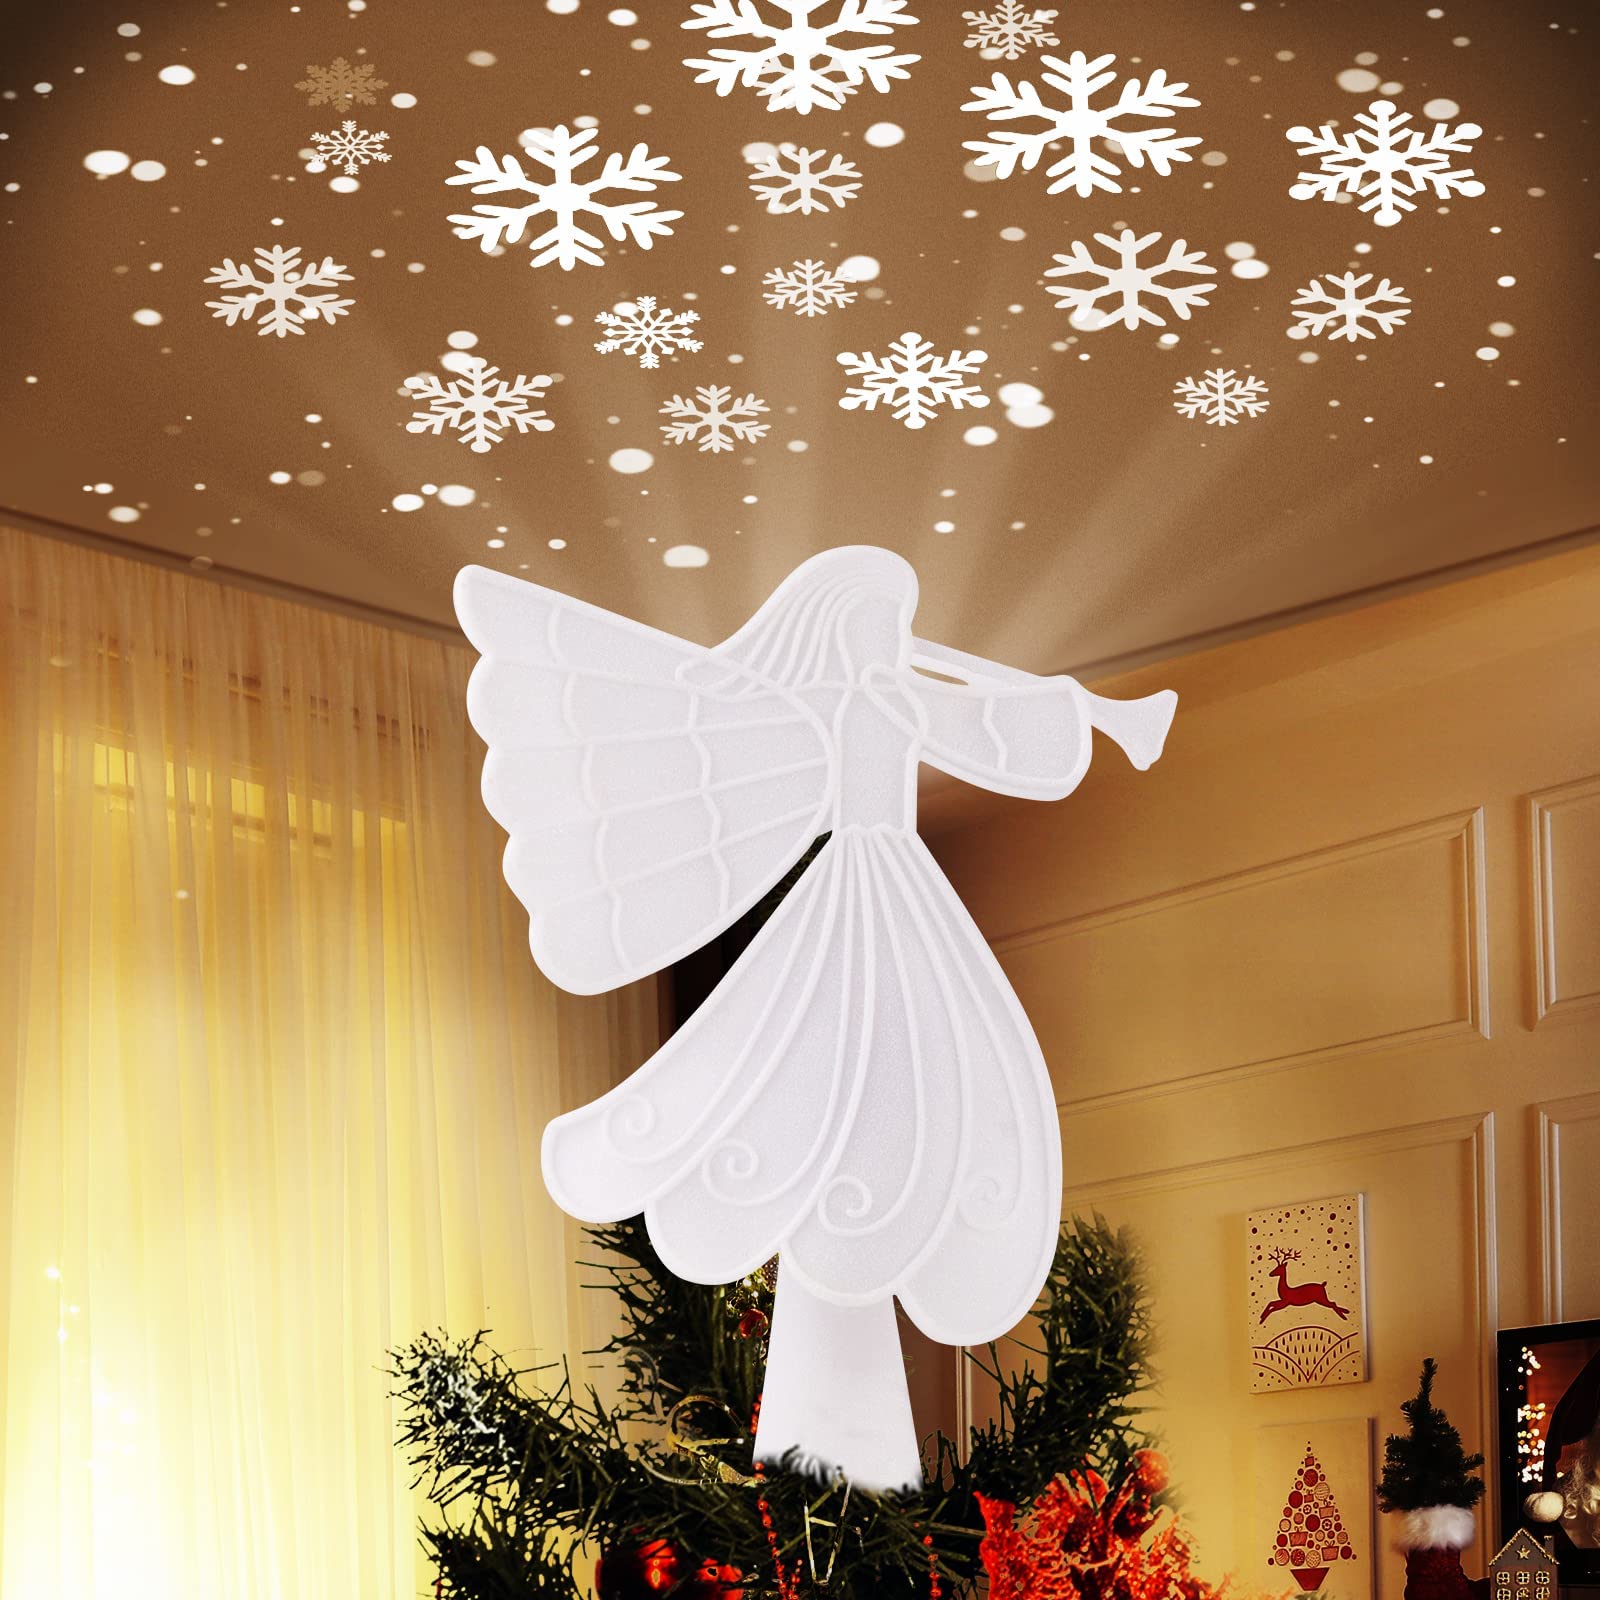 10.4 Inches / White Angel Topper / Snowflake Projection